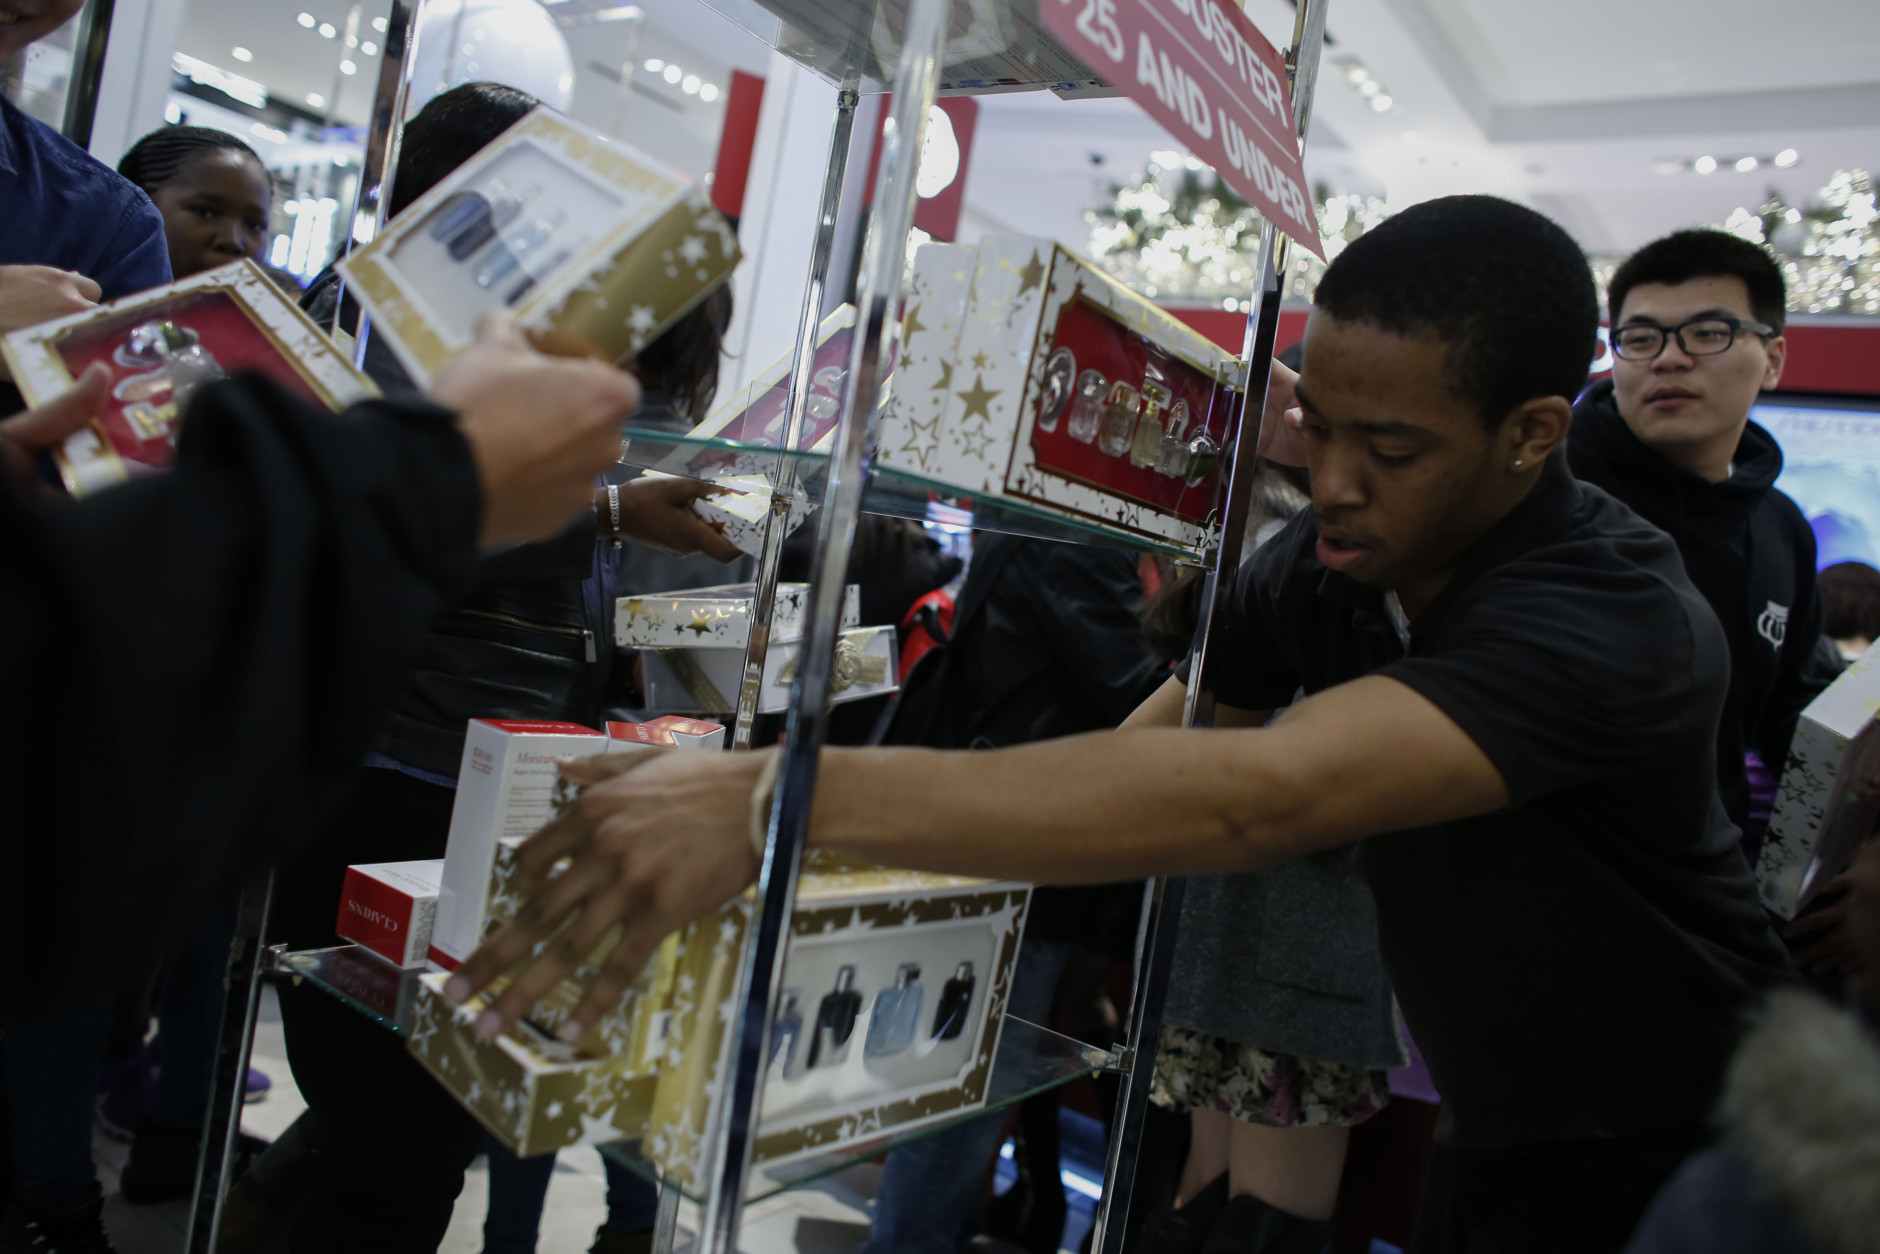 NEW YORK, NY - NOVEMBER 26: An employee restocks a shelf in Macy's flagship store in Herald Square on Thanksgiving evening for early Black Friday sales on November 26, 2015 in New York City. Security has been heightened in Herald Square and around the city as thousands of shoppers flock to stores for sales on the kickoff to the Christmas shopping season. (Photo by Kena Betancur/Getty Images)